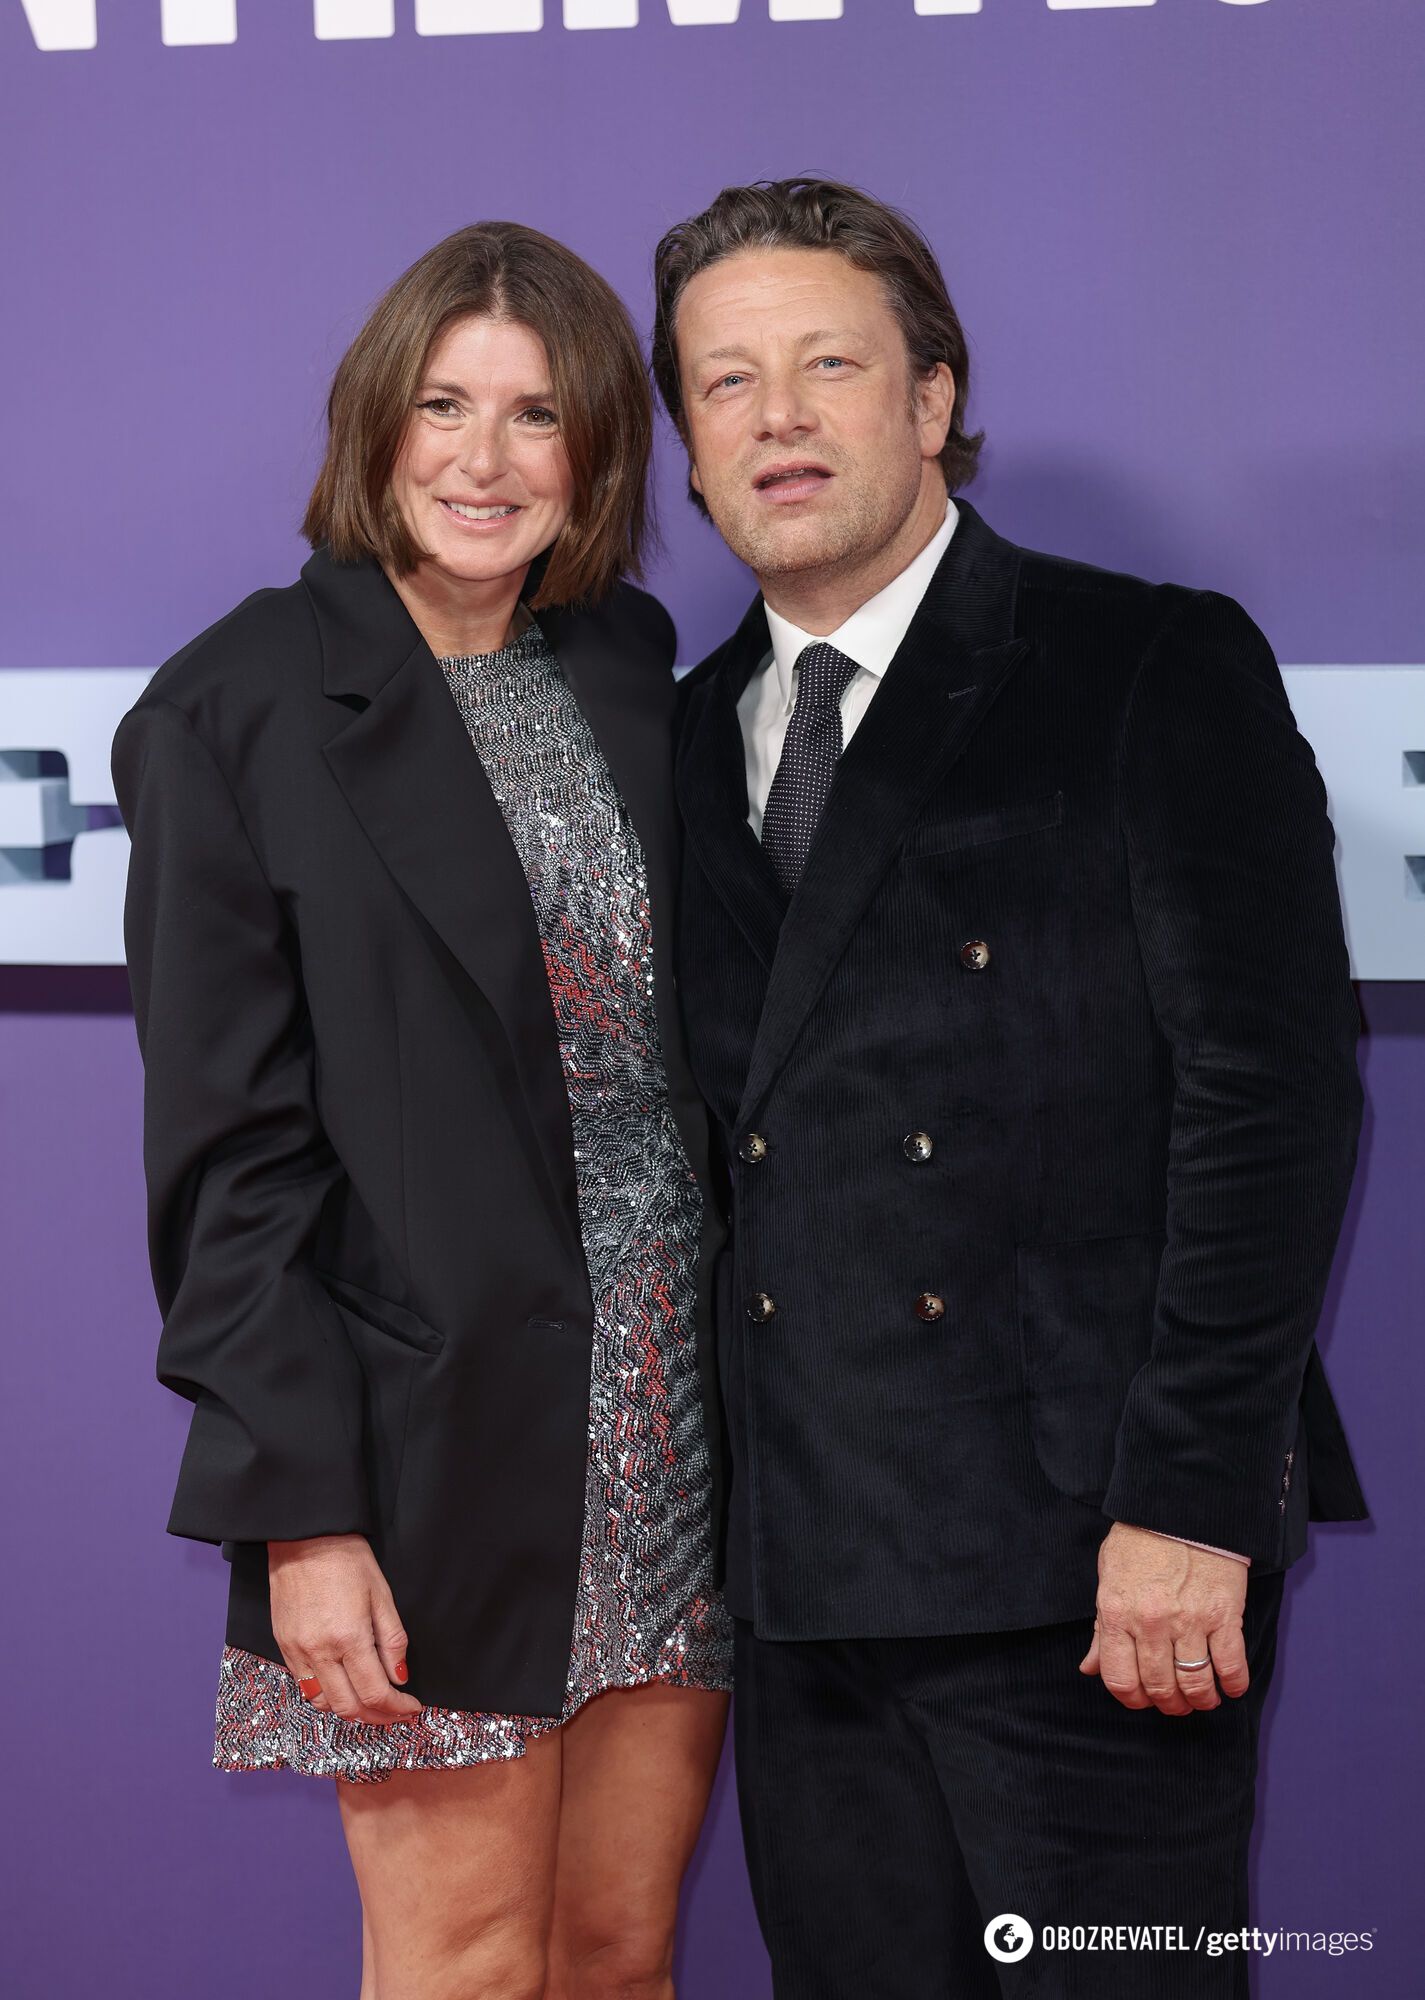 10 celebrity couples who have proven that age is just a number in a passport. Photo